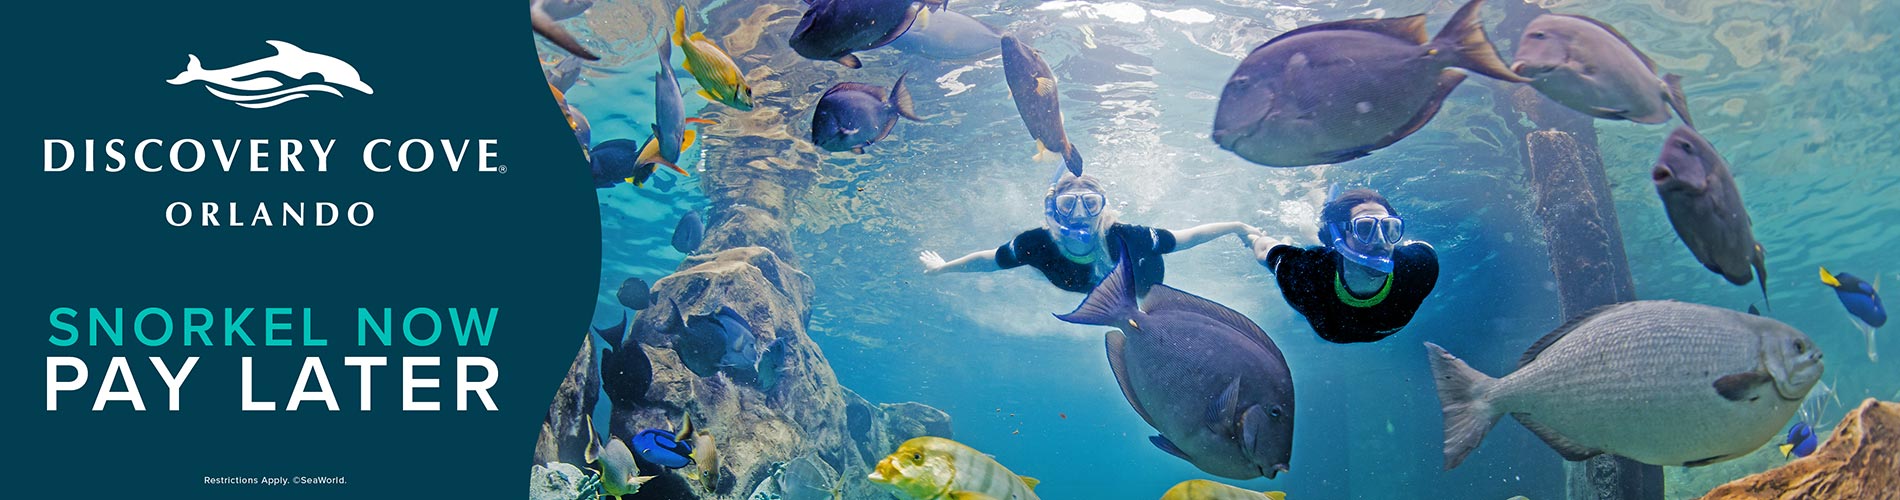 Discovery Cove Orlando Snorkel Now Pay Later with Affirm